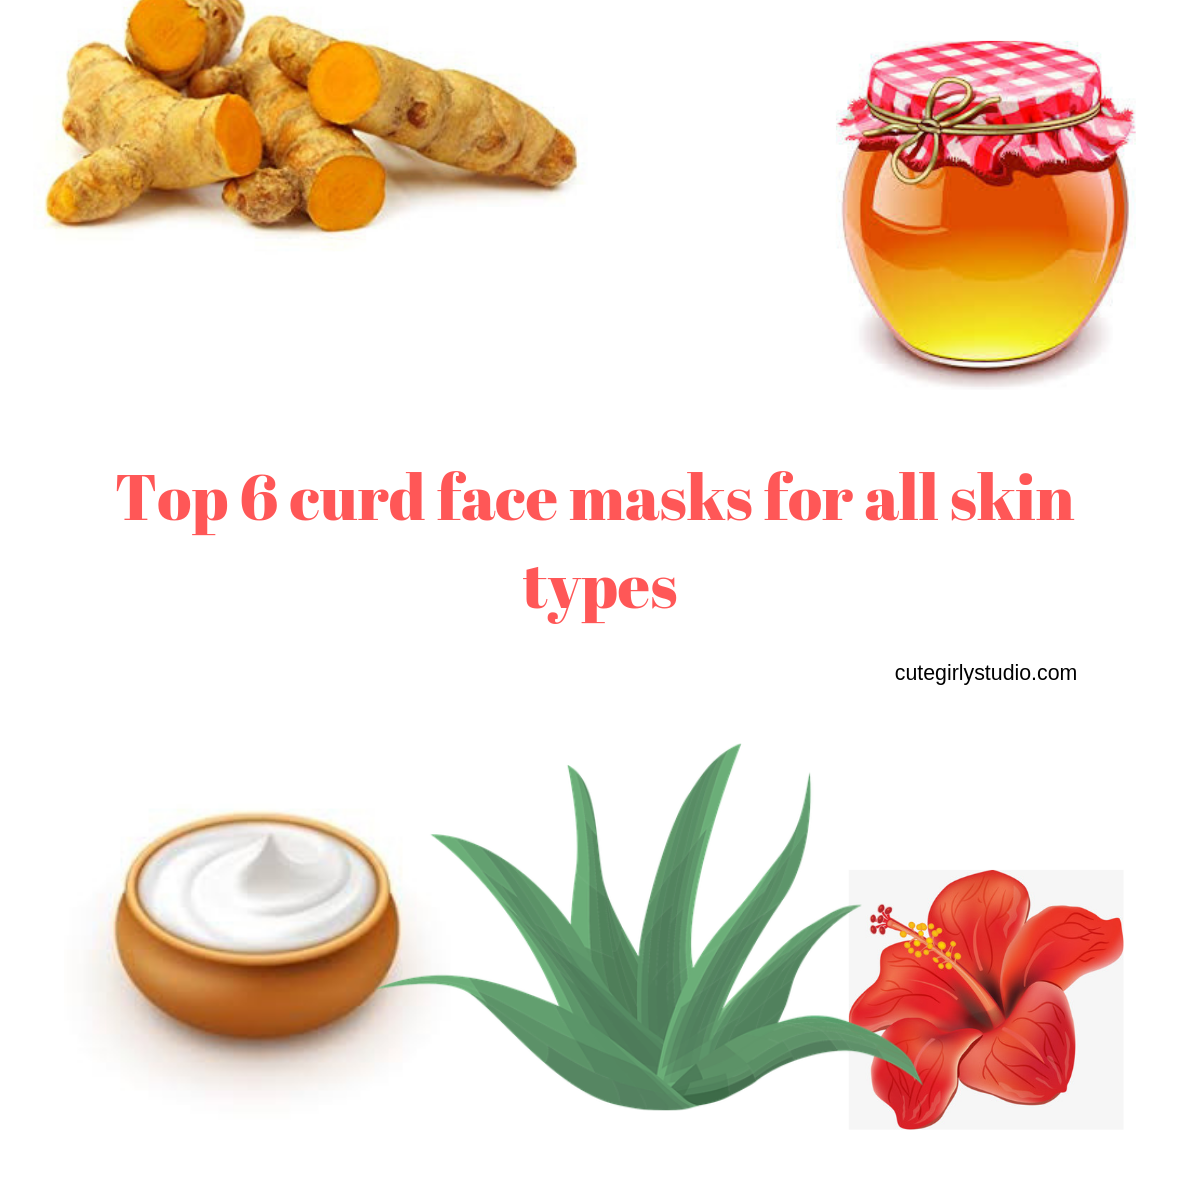 Top 6 curd face masks for all skin types